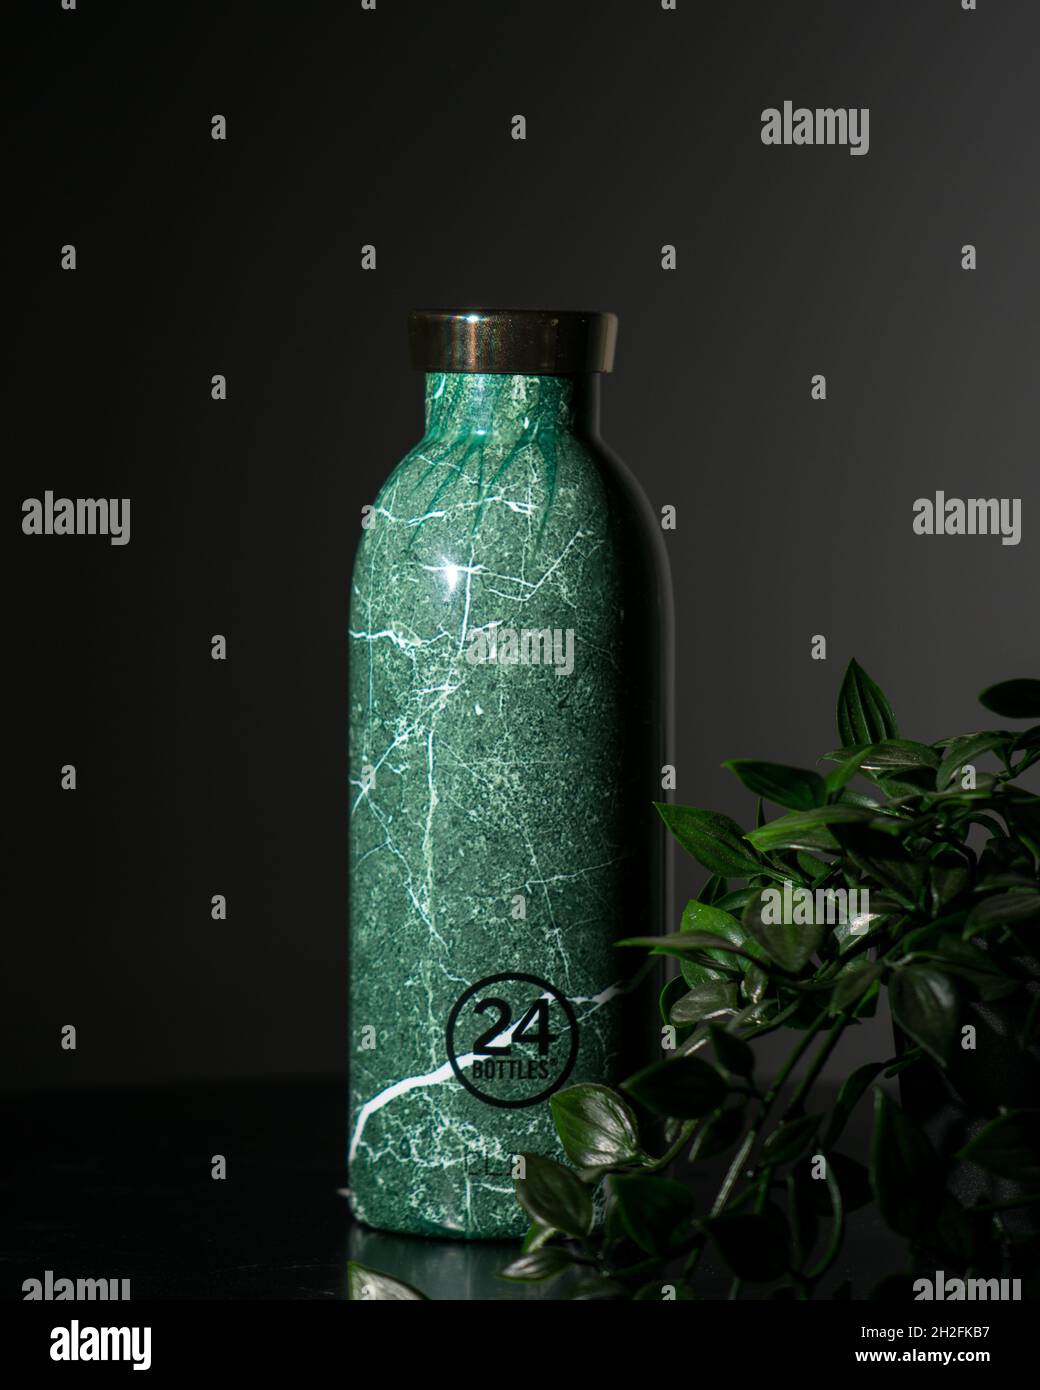 NICOSIA, CYPRUS - Jun 21, 2021: An image of a green marble stainless steel reusable water bottle and decorative plant leaves on a table Stock Photo